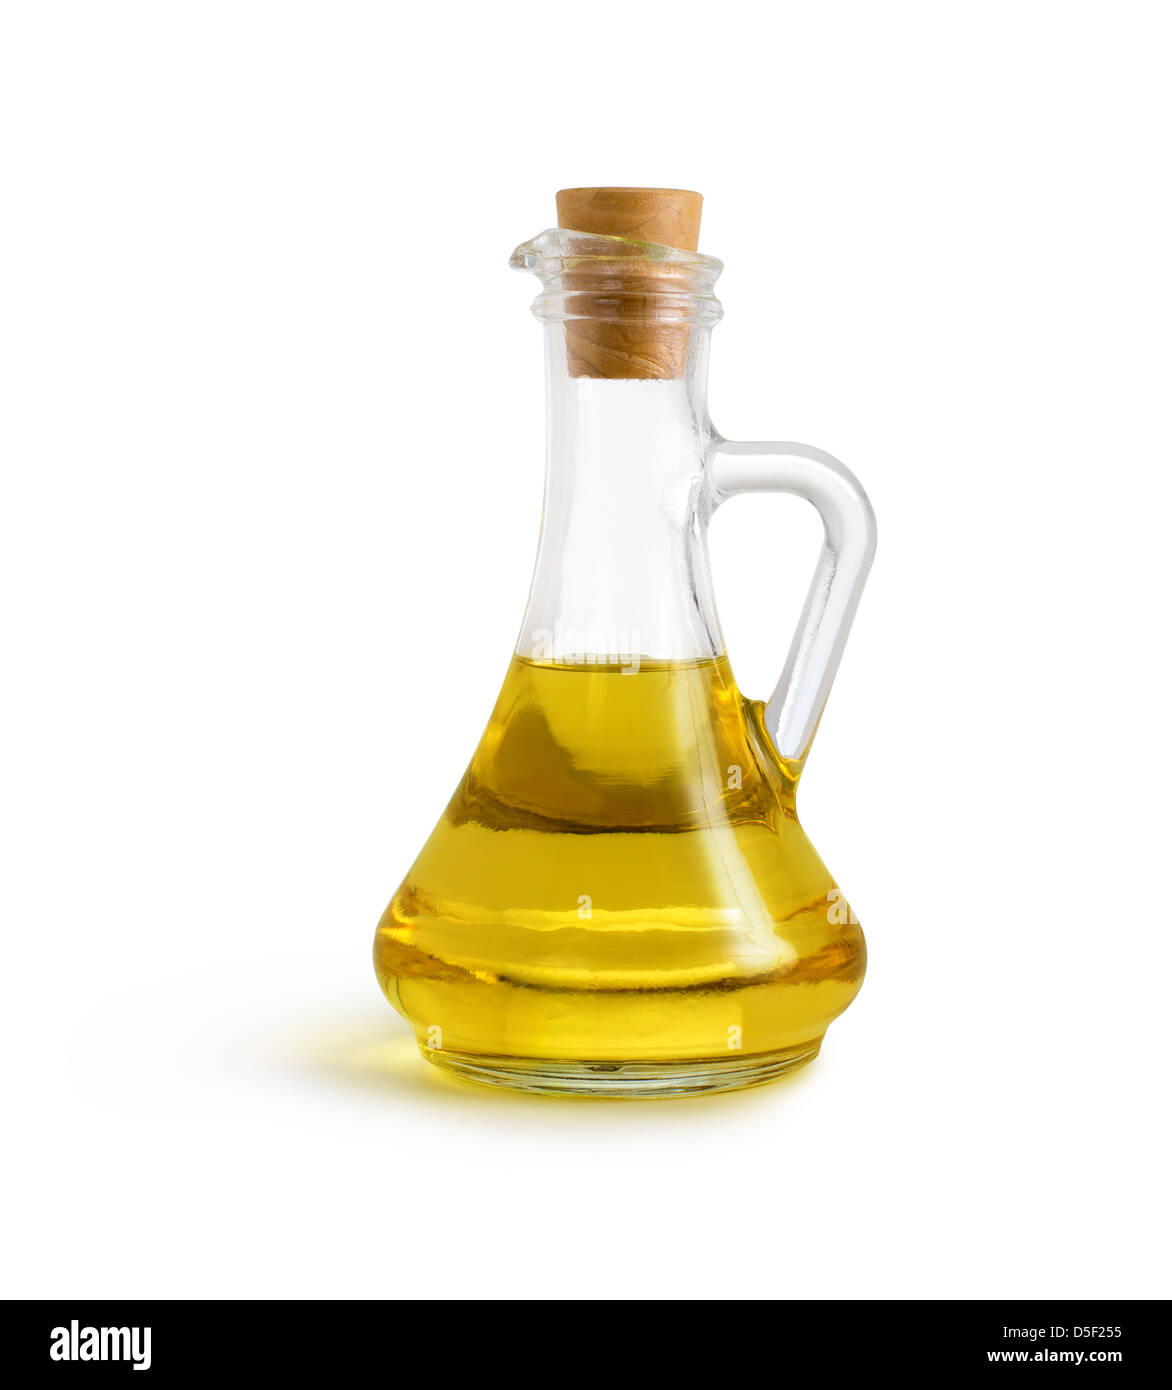 olive vegetable oil in glass pitcher isolated on white with clipping path included Stock Photo